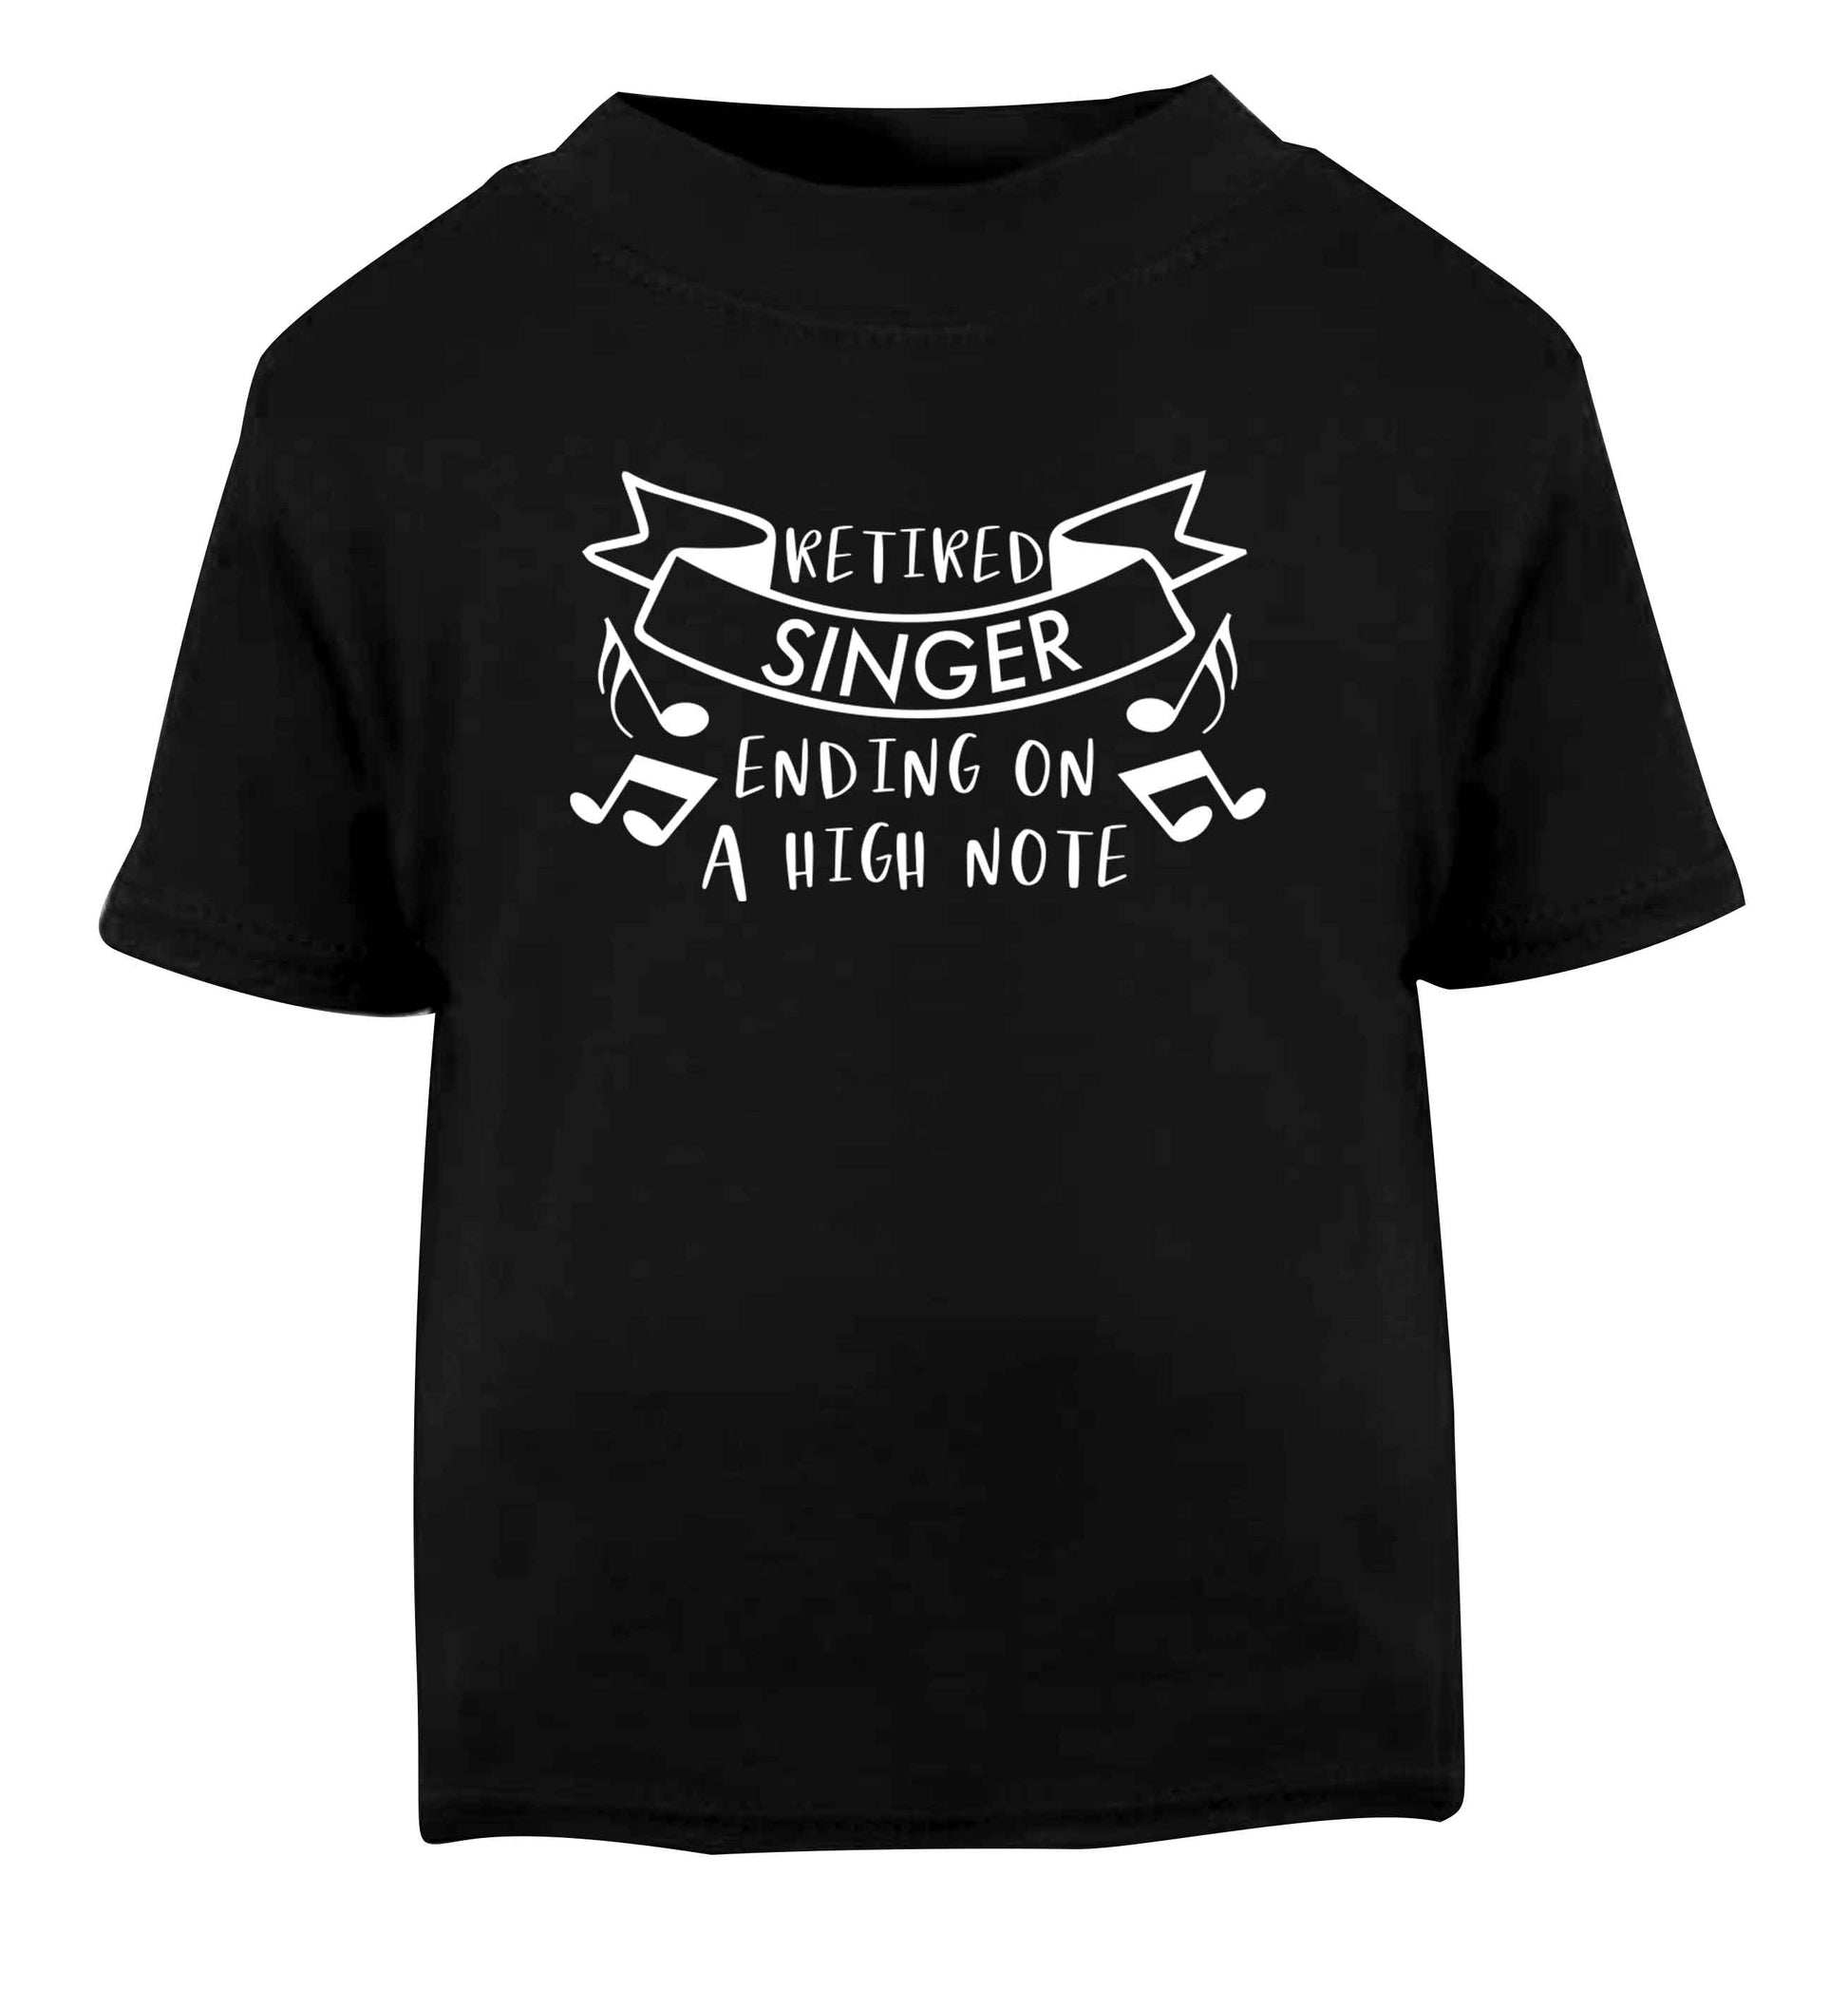 Retired singer ending on a high note Black Baby Toddler Tshirt 2 years